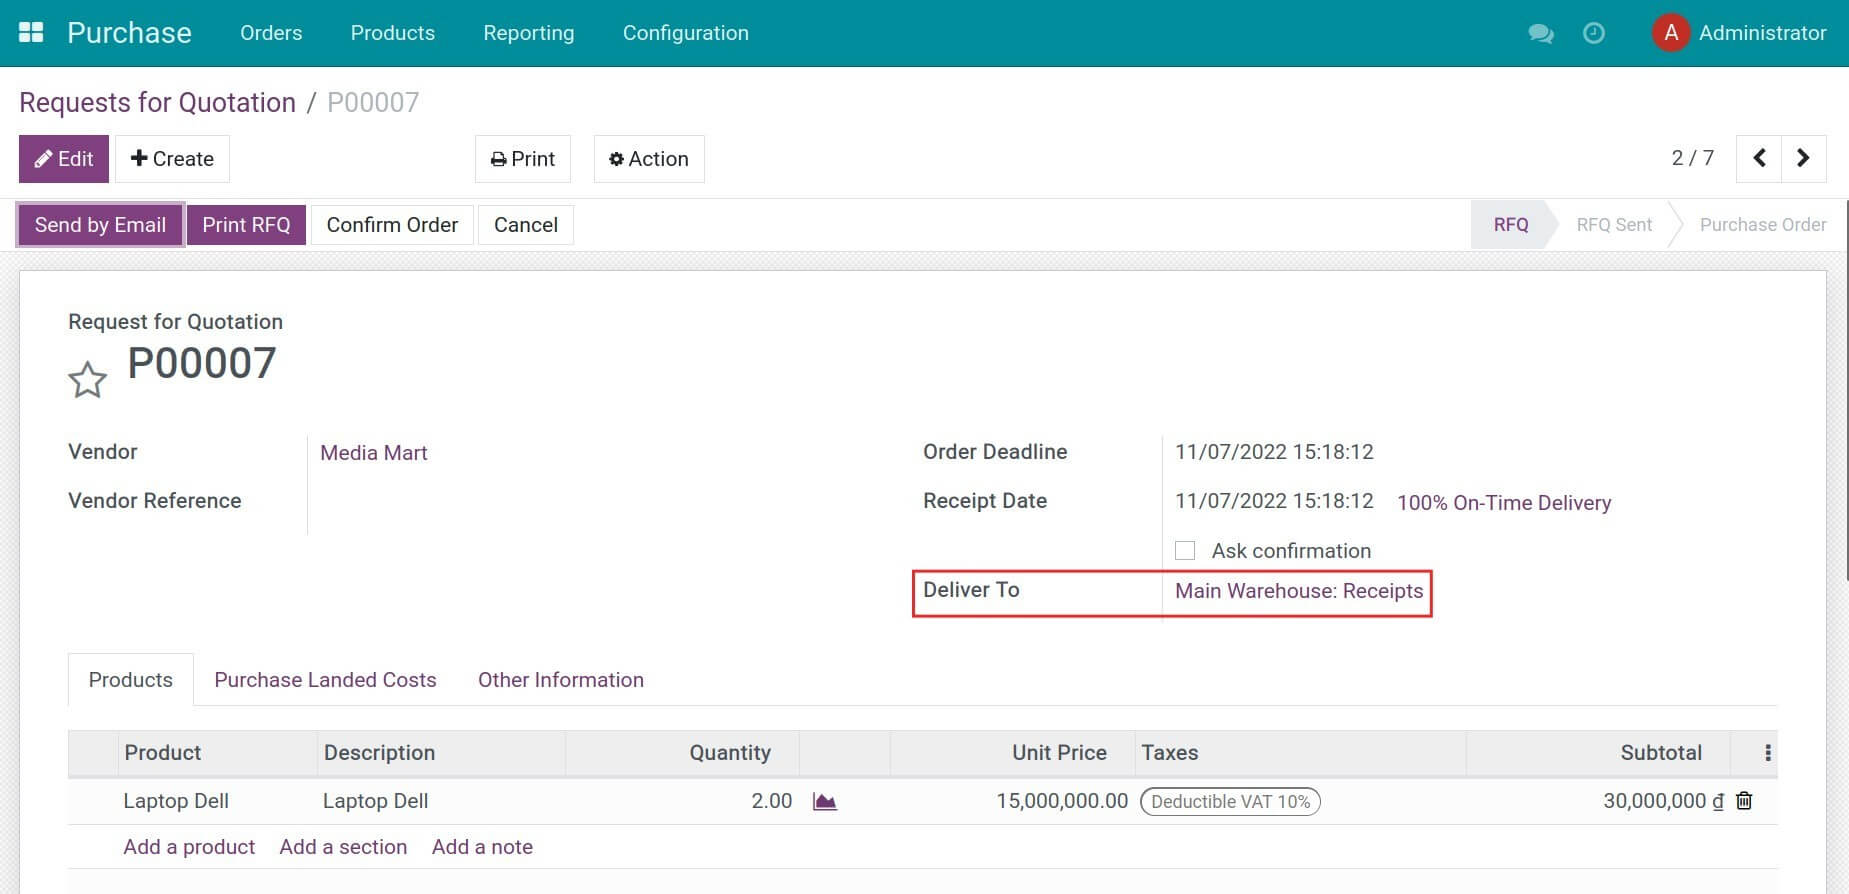 Create a purchase order with delivery to the main warehouse